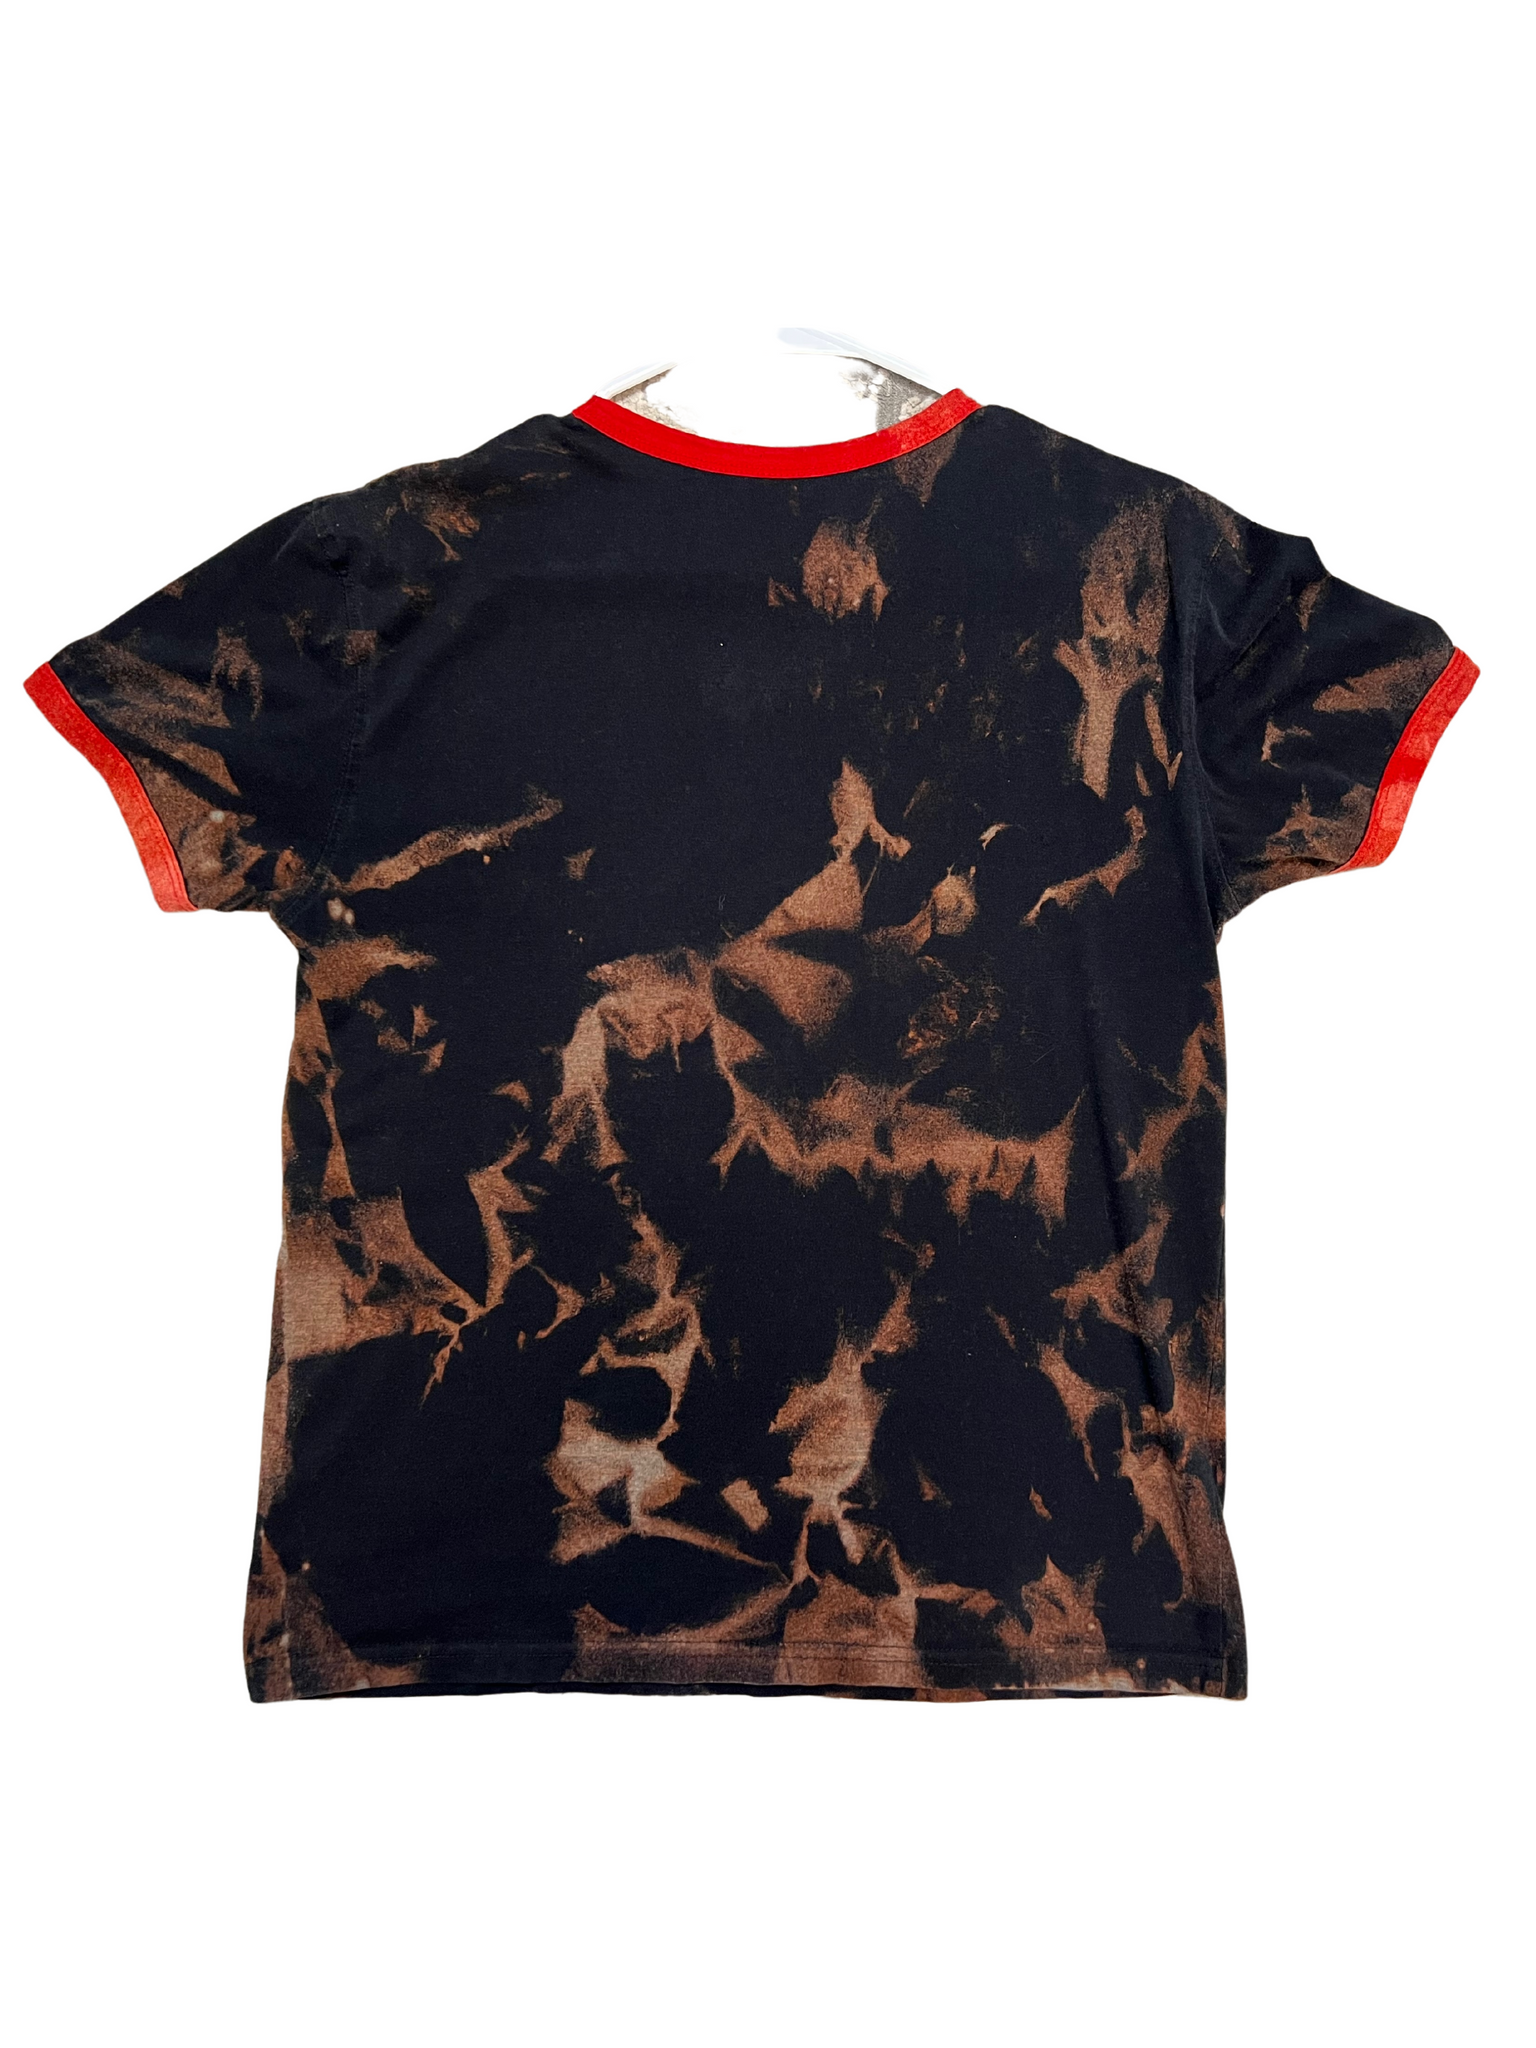 Ohio State University Bleached Ringer Tee